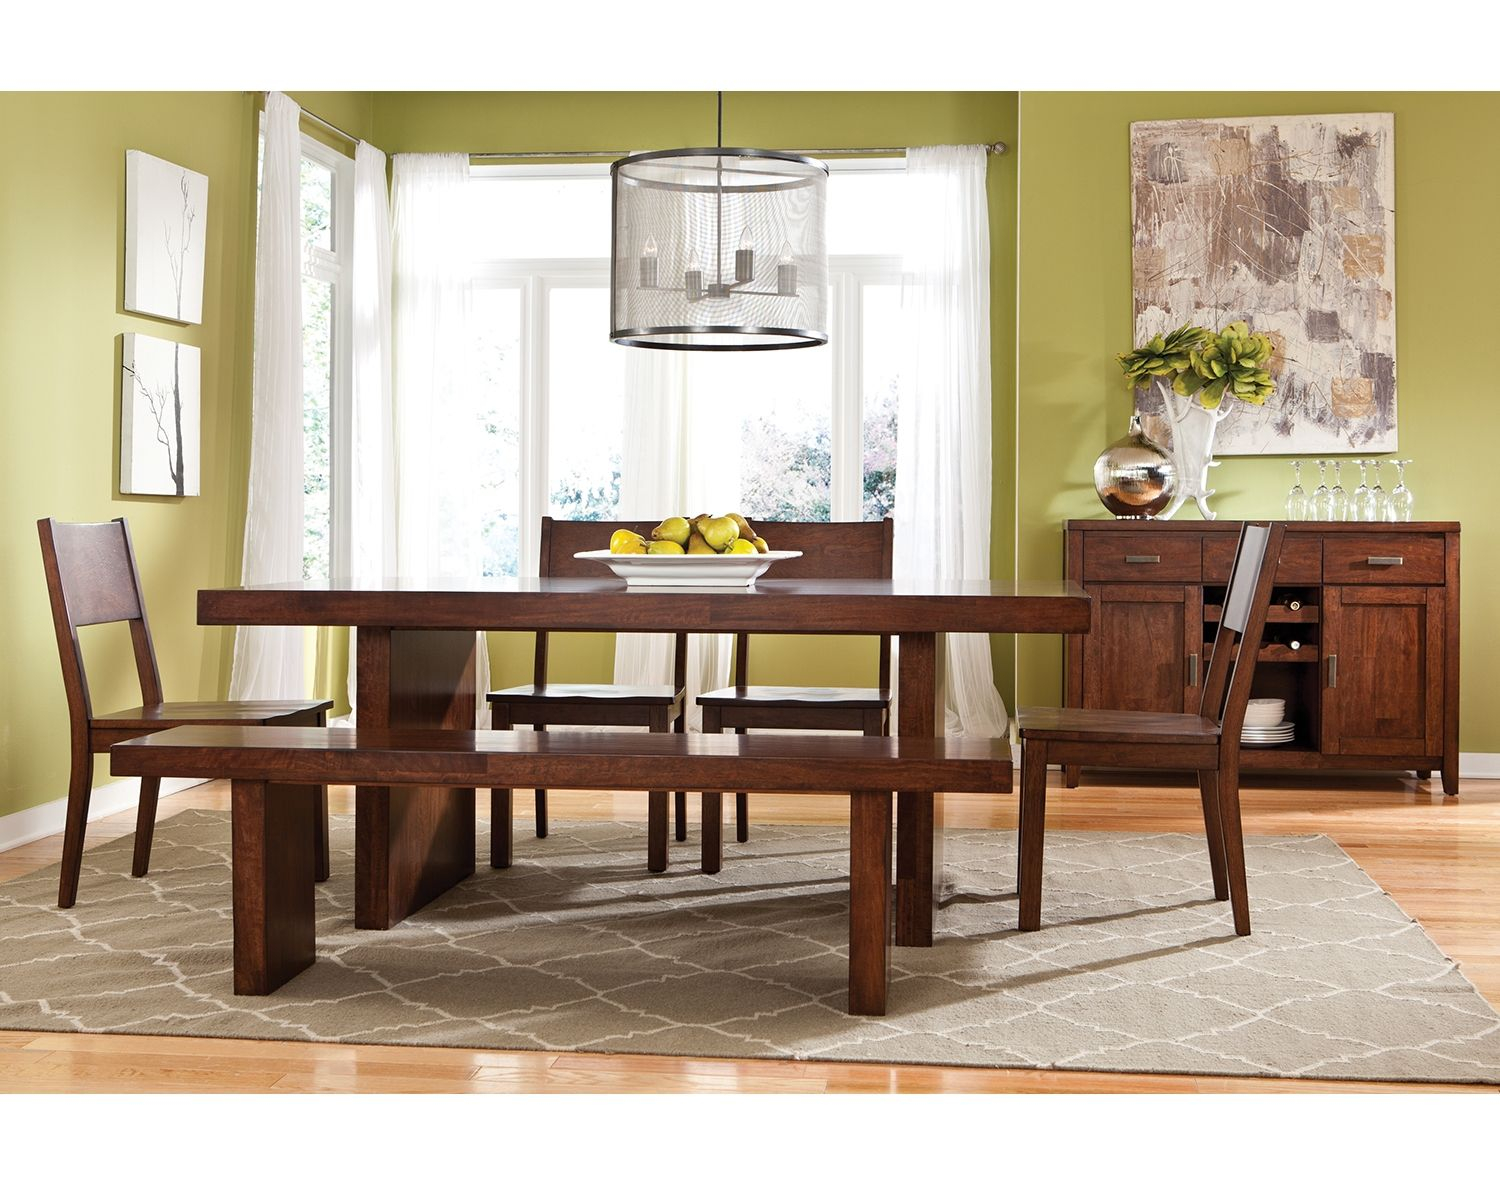 Tremont Dining Room Collection Leons Dining Room with regard to dimensions 1500 X 1185